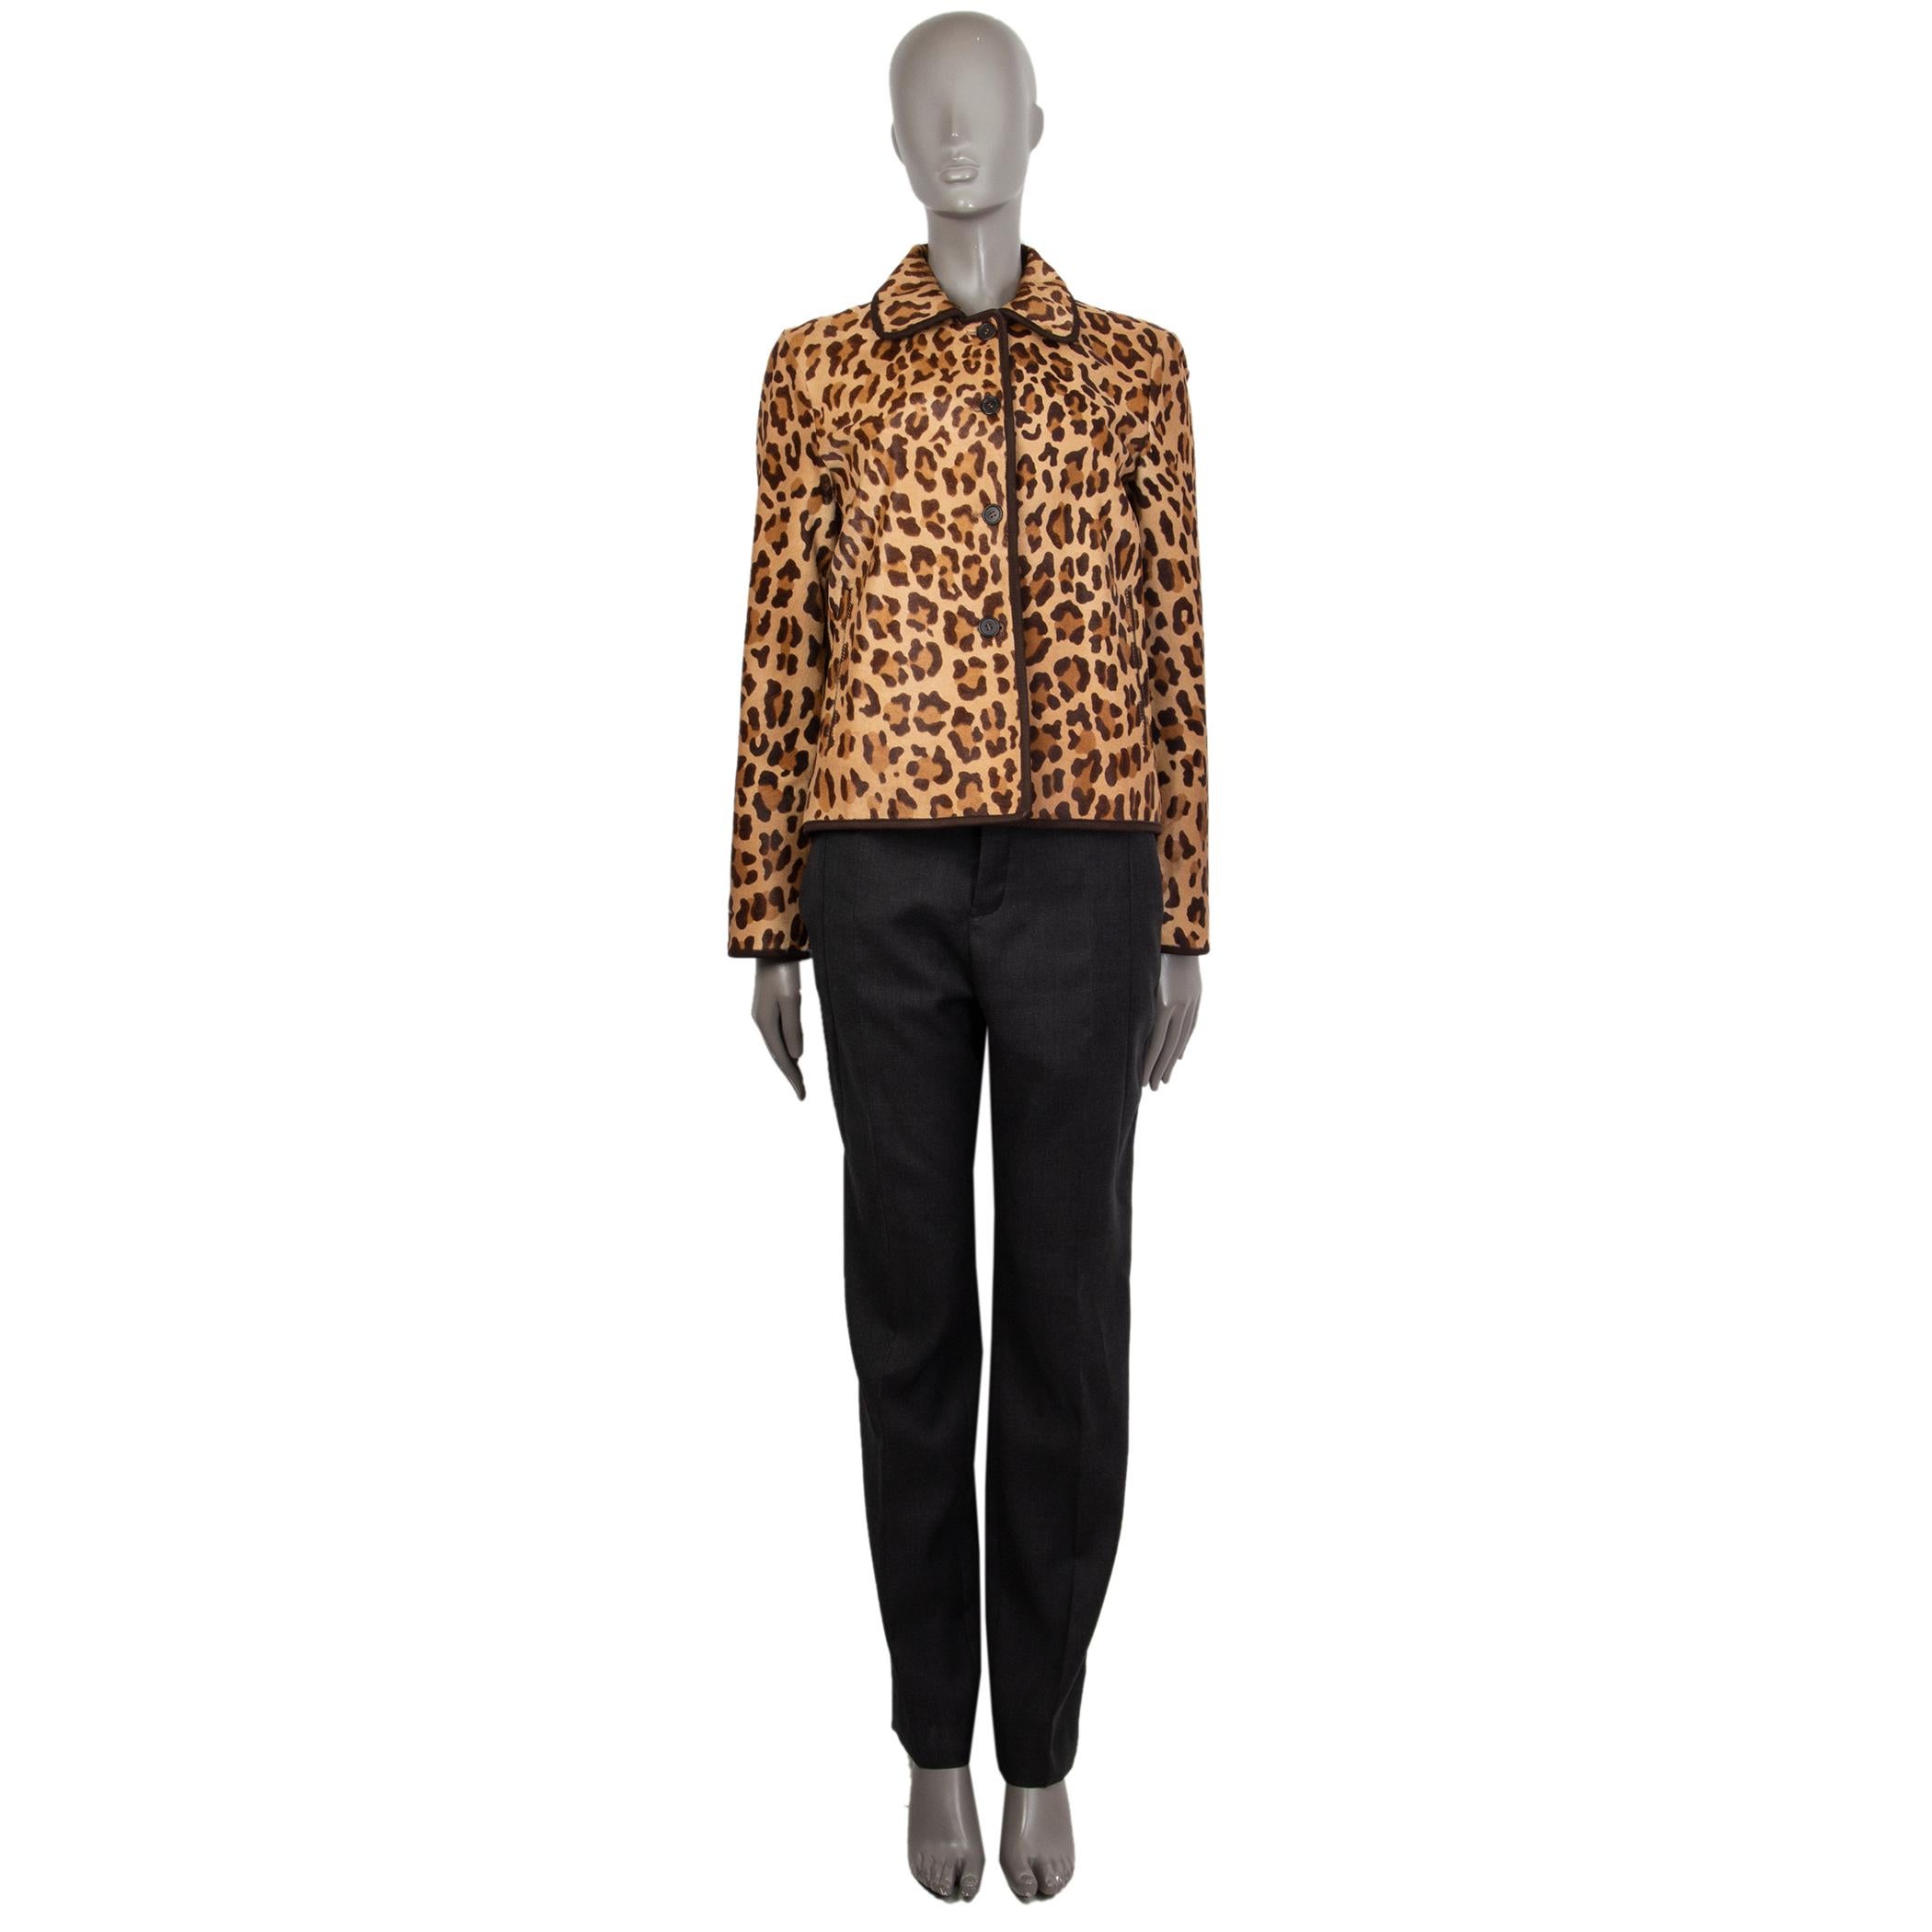 100% authentic Prada leopard-print jacket in espresso, brown and camel calf hair with a flat collar. Has two slit pockets on the front. Closes on the front with buttons. Lined. Inserts are leather. Has been worn and is in excellent condition.